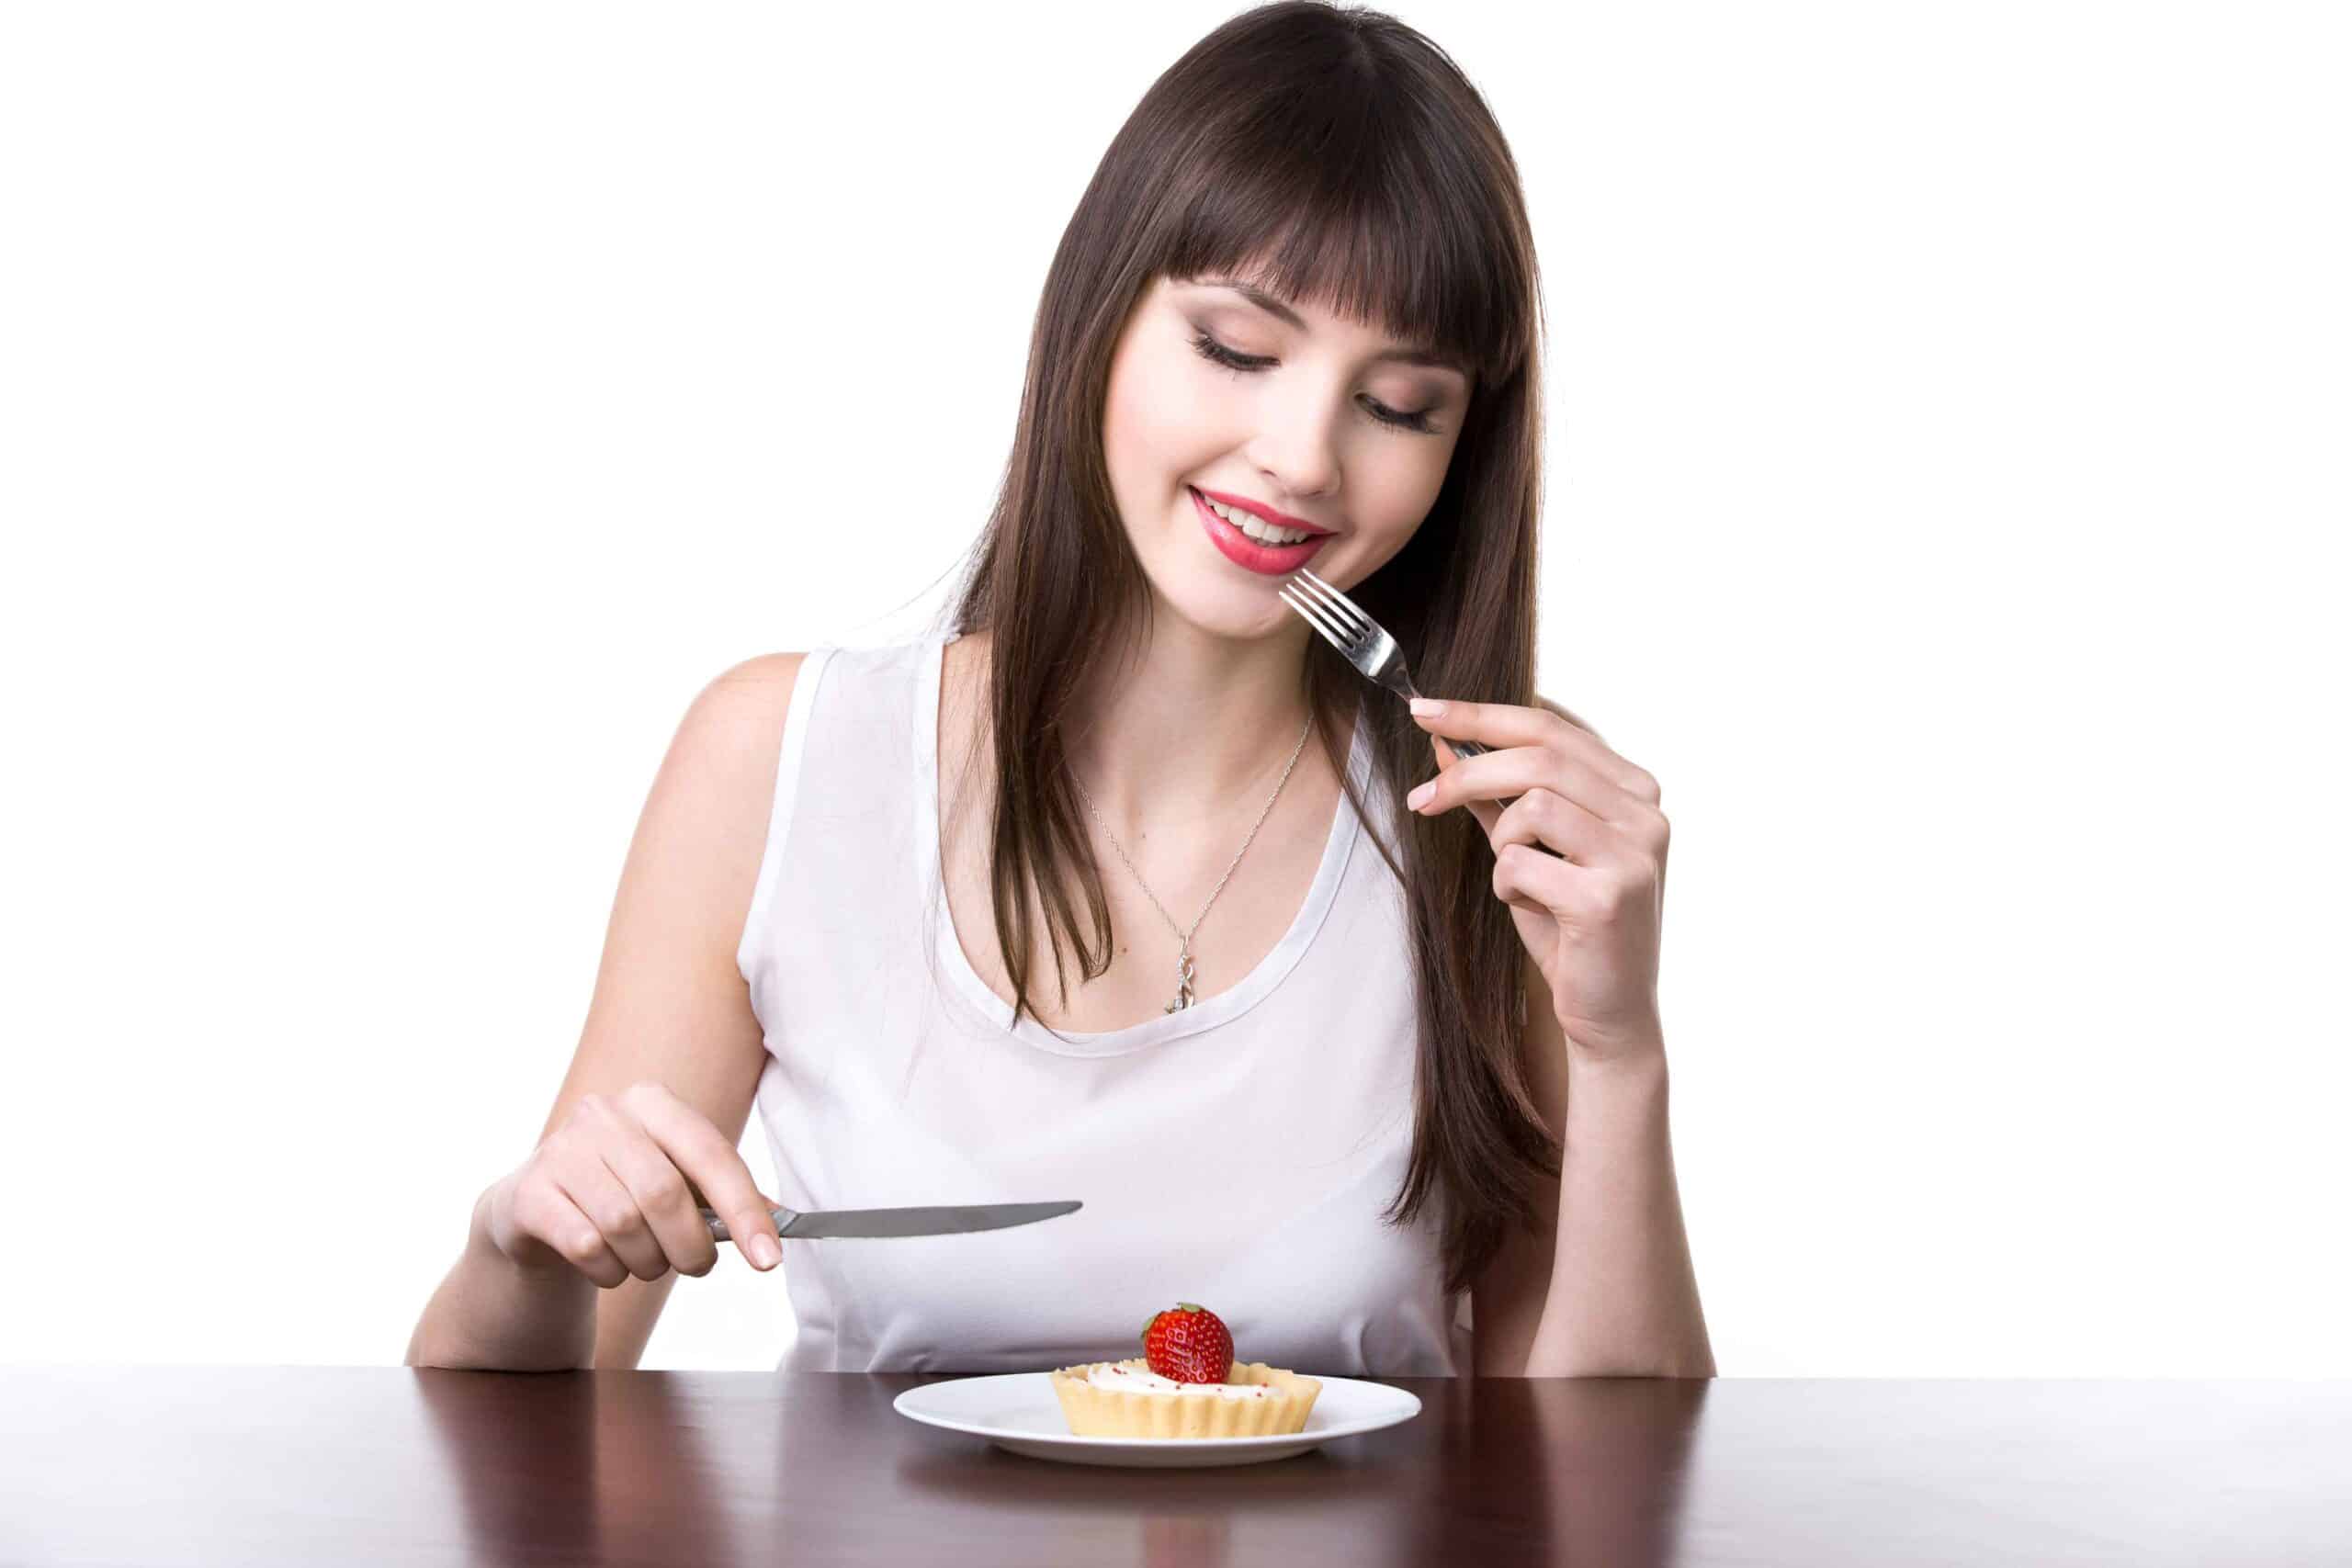 woman eating a portion of cake